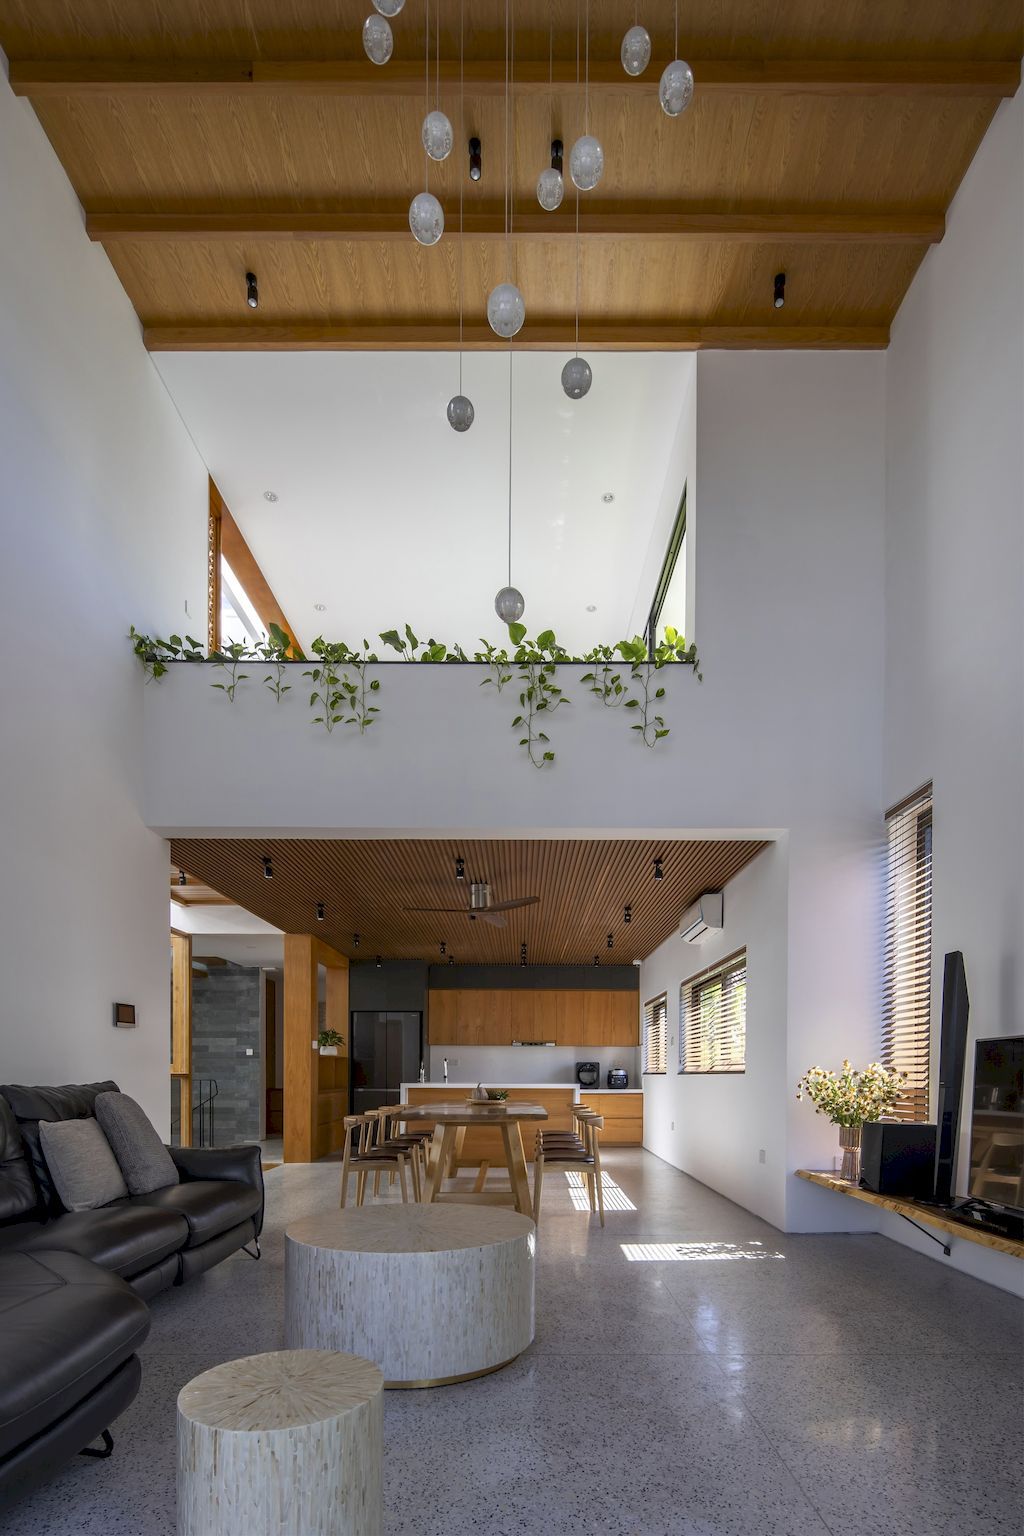 TT House, tranquil harmony of work and home spaces by PsA Architecture